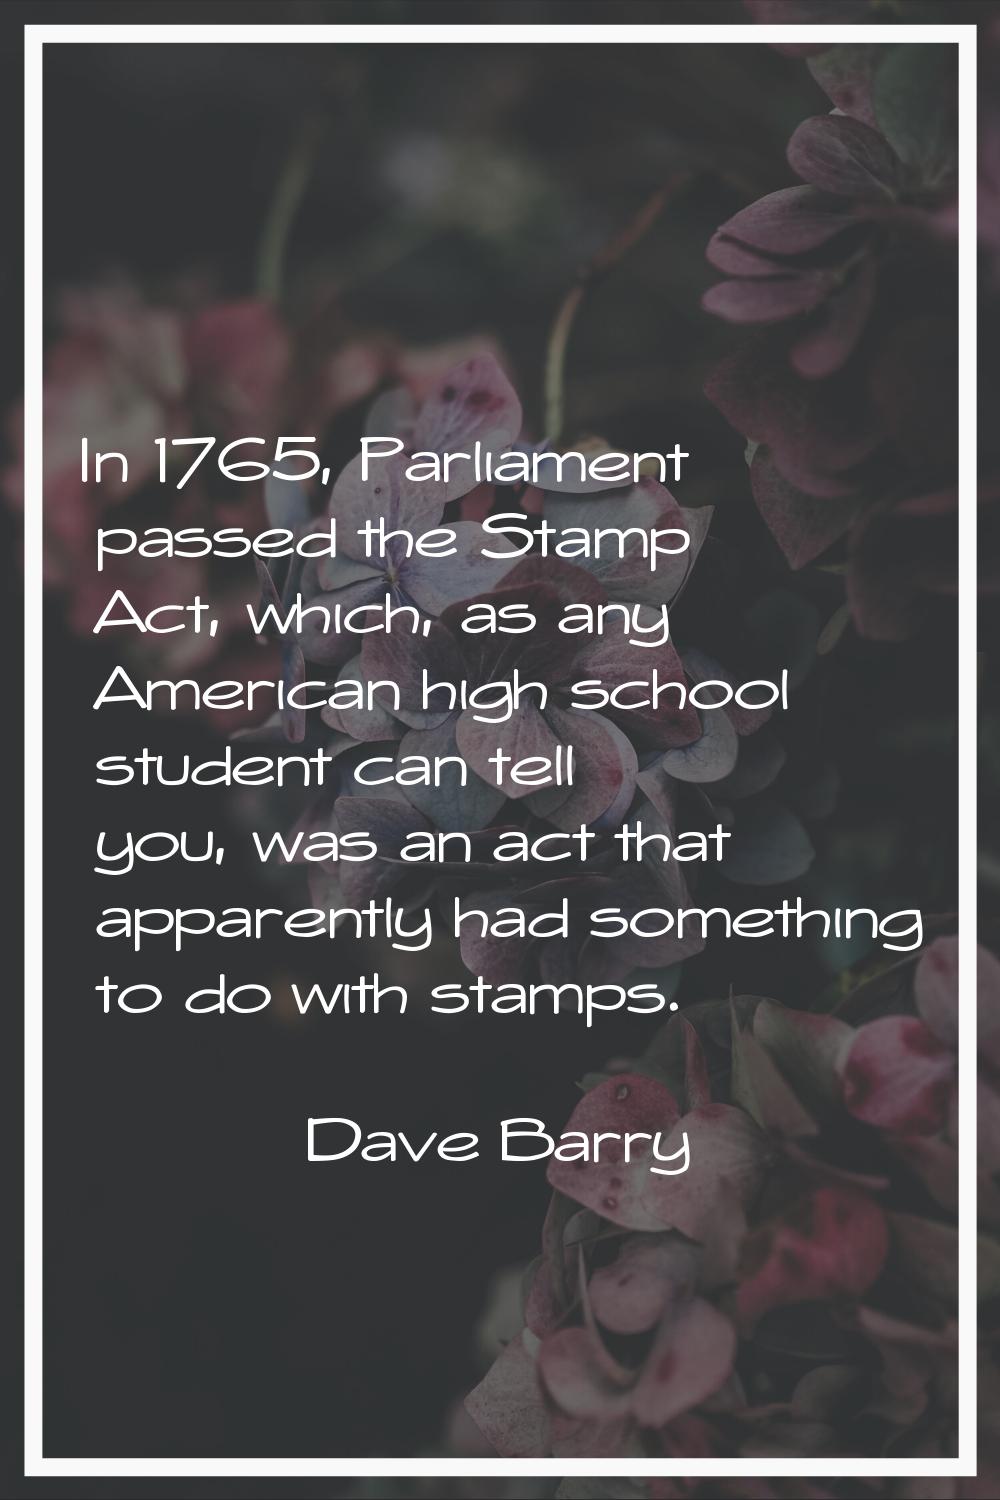 In 1765, Parliament passed the Stamp Act, which, as any American high school student can tell you, 